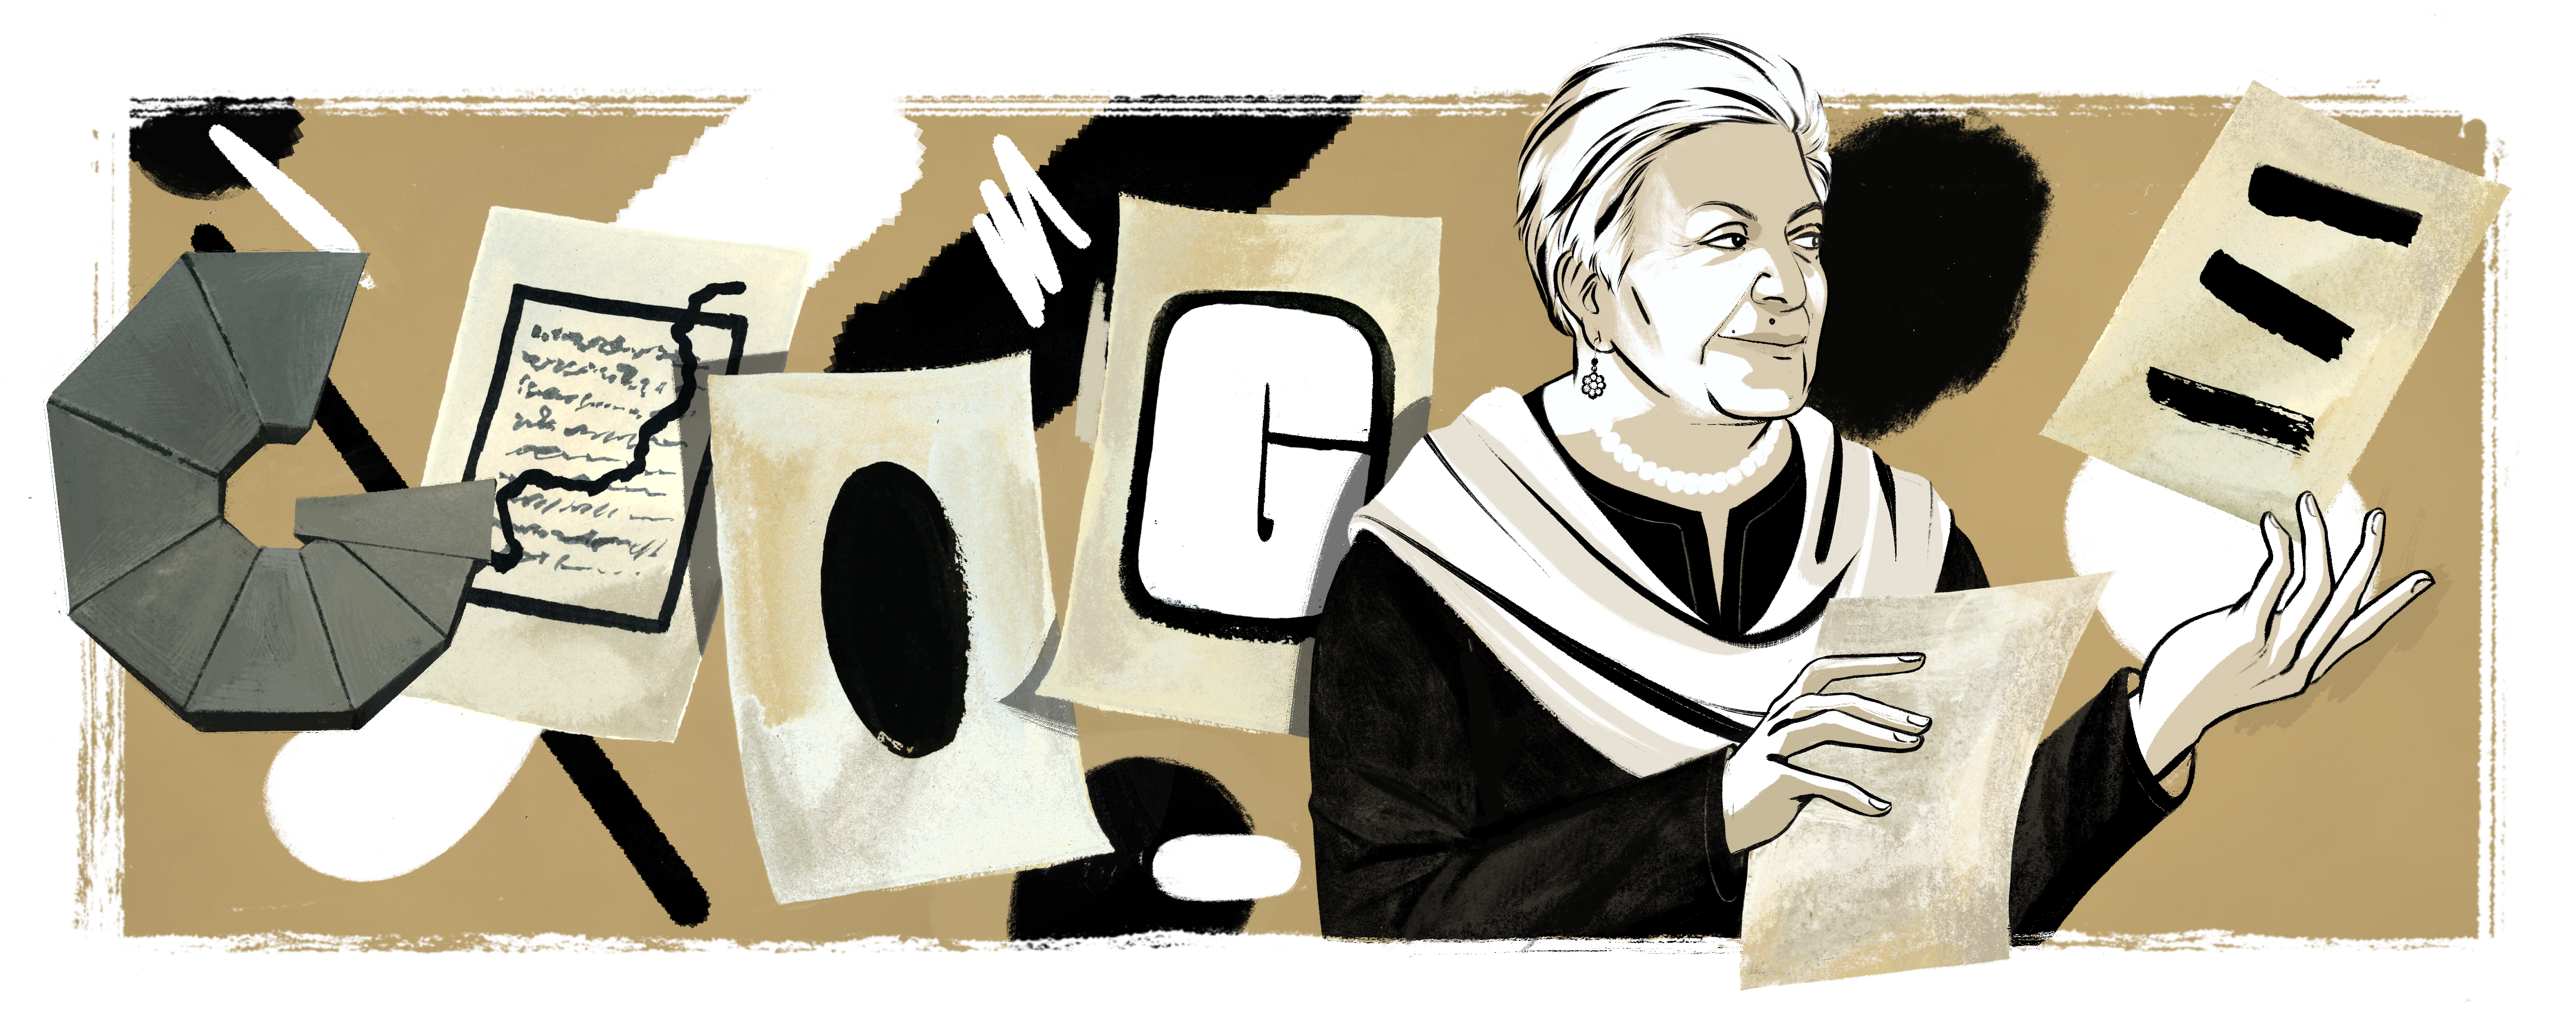 Digital illustration of Zarina Hashmi holding some of her sketches on paper in each hand. Zarina represents the L in the GOOGLE logo and has white short hair, earrings and a pearl necklace, a black dress, and a white shawl. The rest of the Google logo is represented by sheets or paper with shapes on them that appear like the letters. The background is tan with black and white abstract shapes on it. 